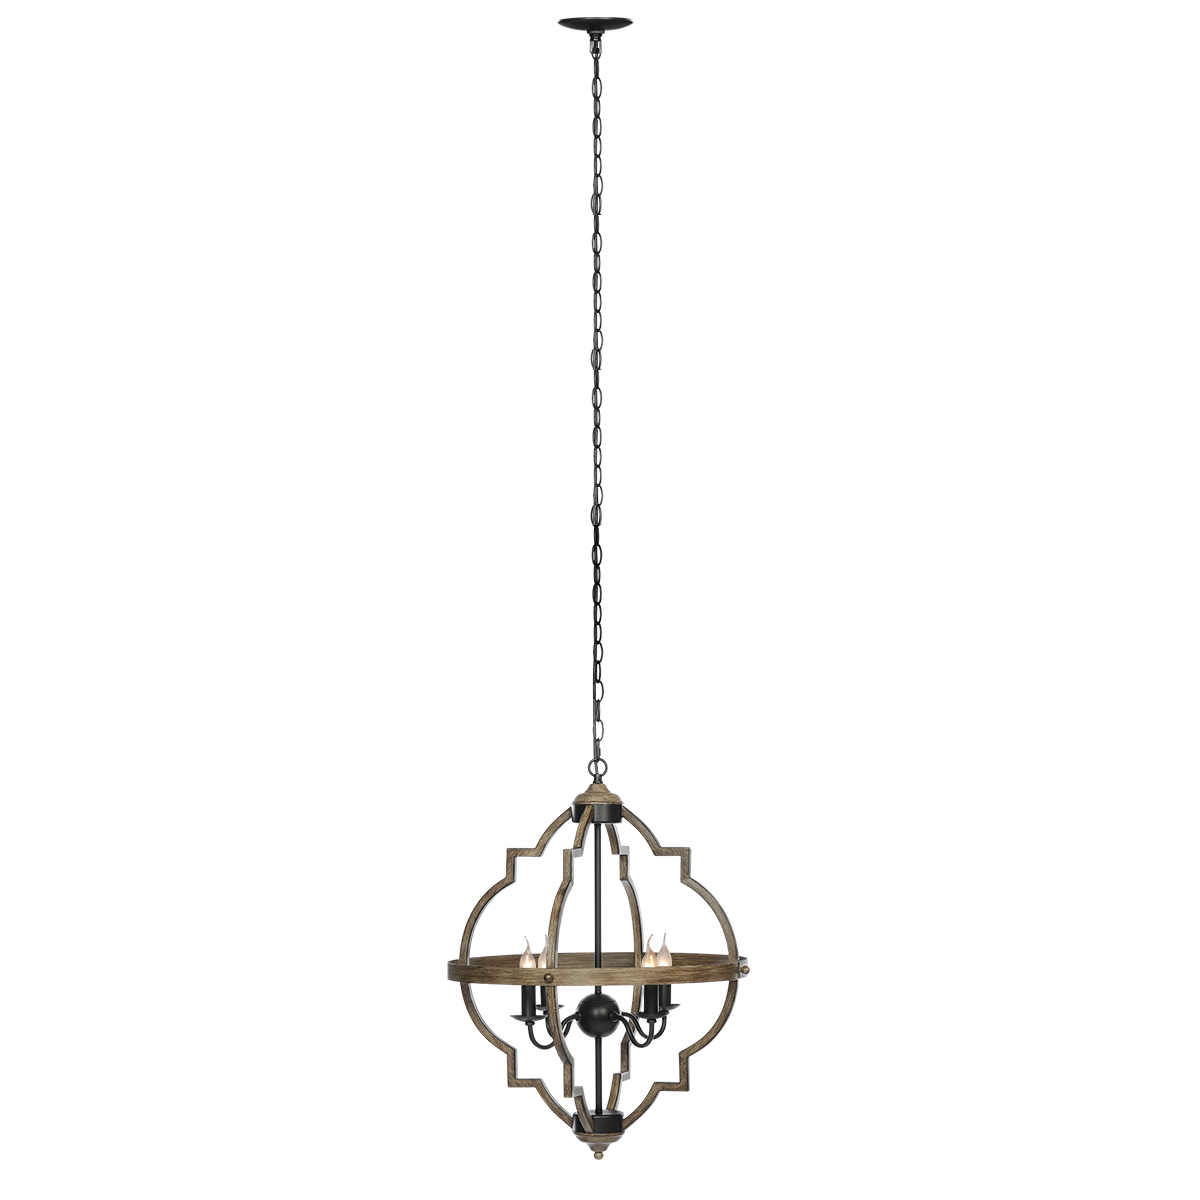 Find 4-Light Pendant Lighting Rustic Metal Chandelier Industrial Ceiling Hanging Lamp for Sale on Gipsybee.com with cryptocurrencies